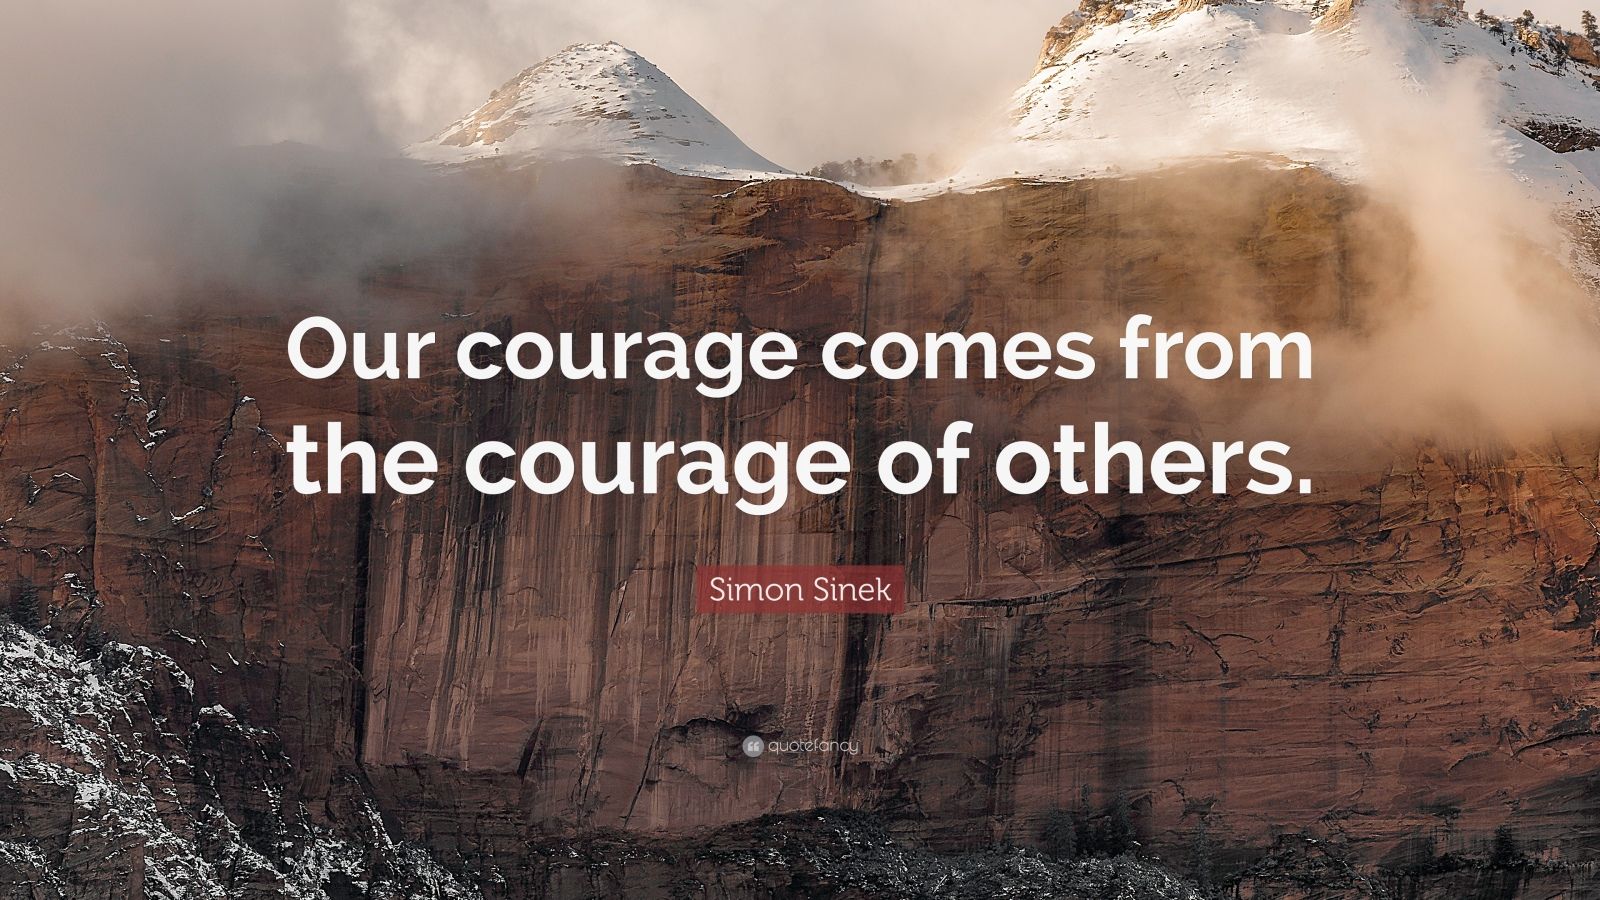 Simon Sinek Quote: “Our courage comes from the courage of others.” (10 ...